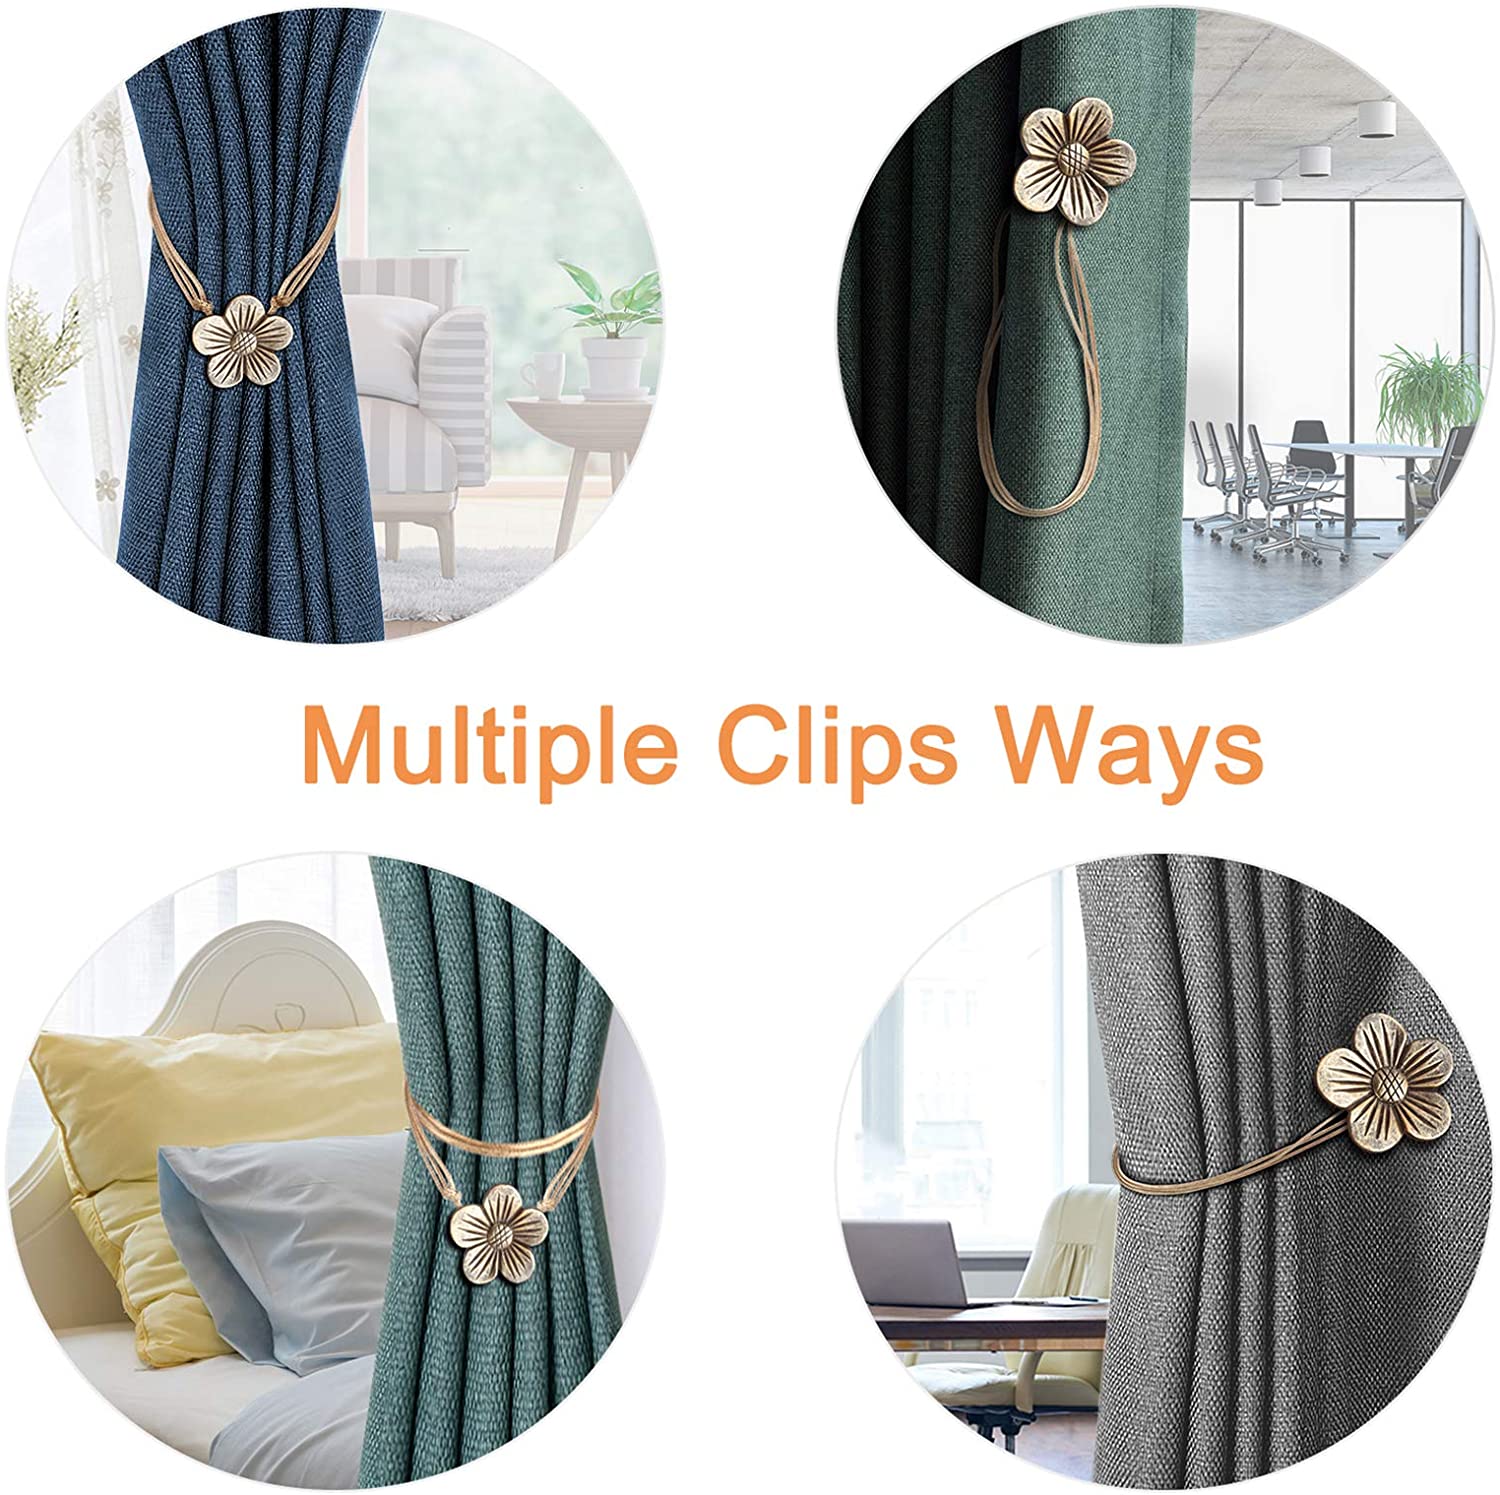 Stay Smart Way Vintage Magnetic Curtain Tiebacks (Resin) for Window Drapery - Set of 2 White-Gray